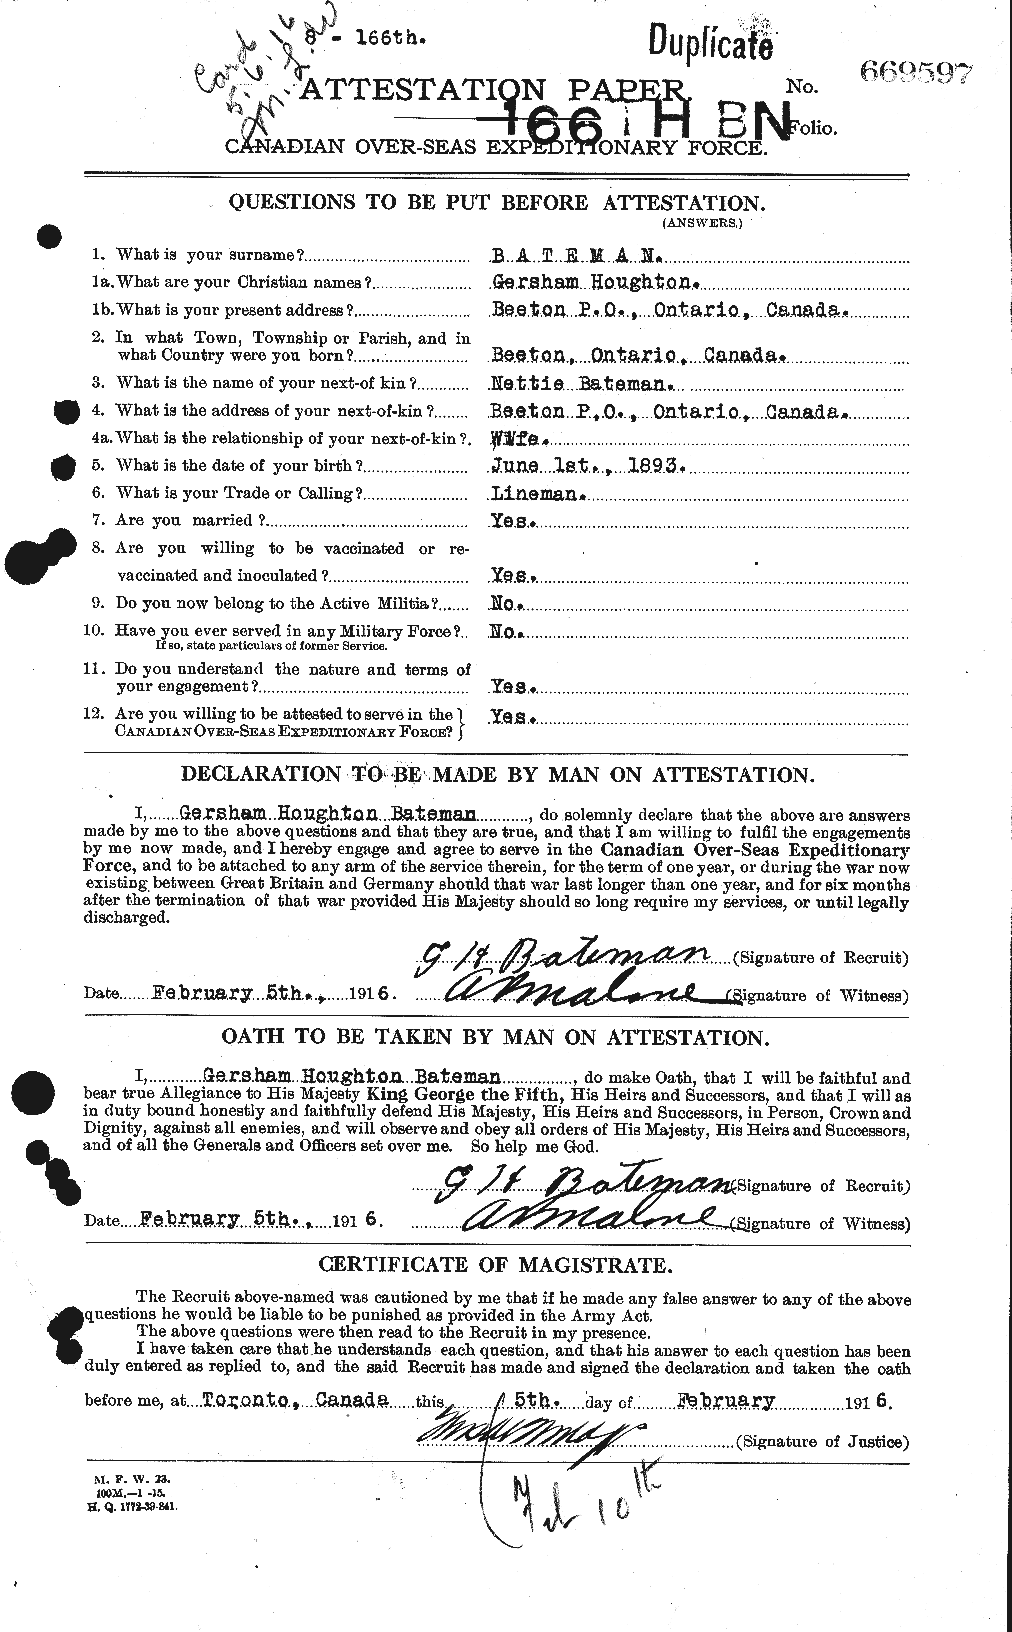 Personnel Records of the First World War - CEF 228027a